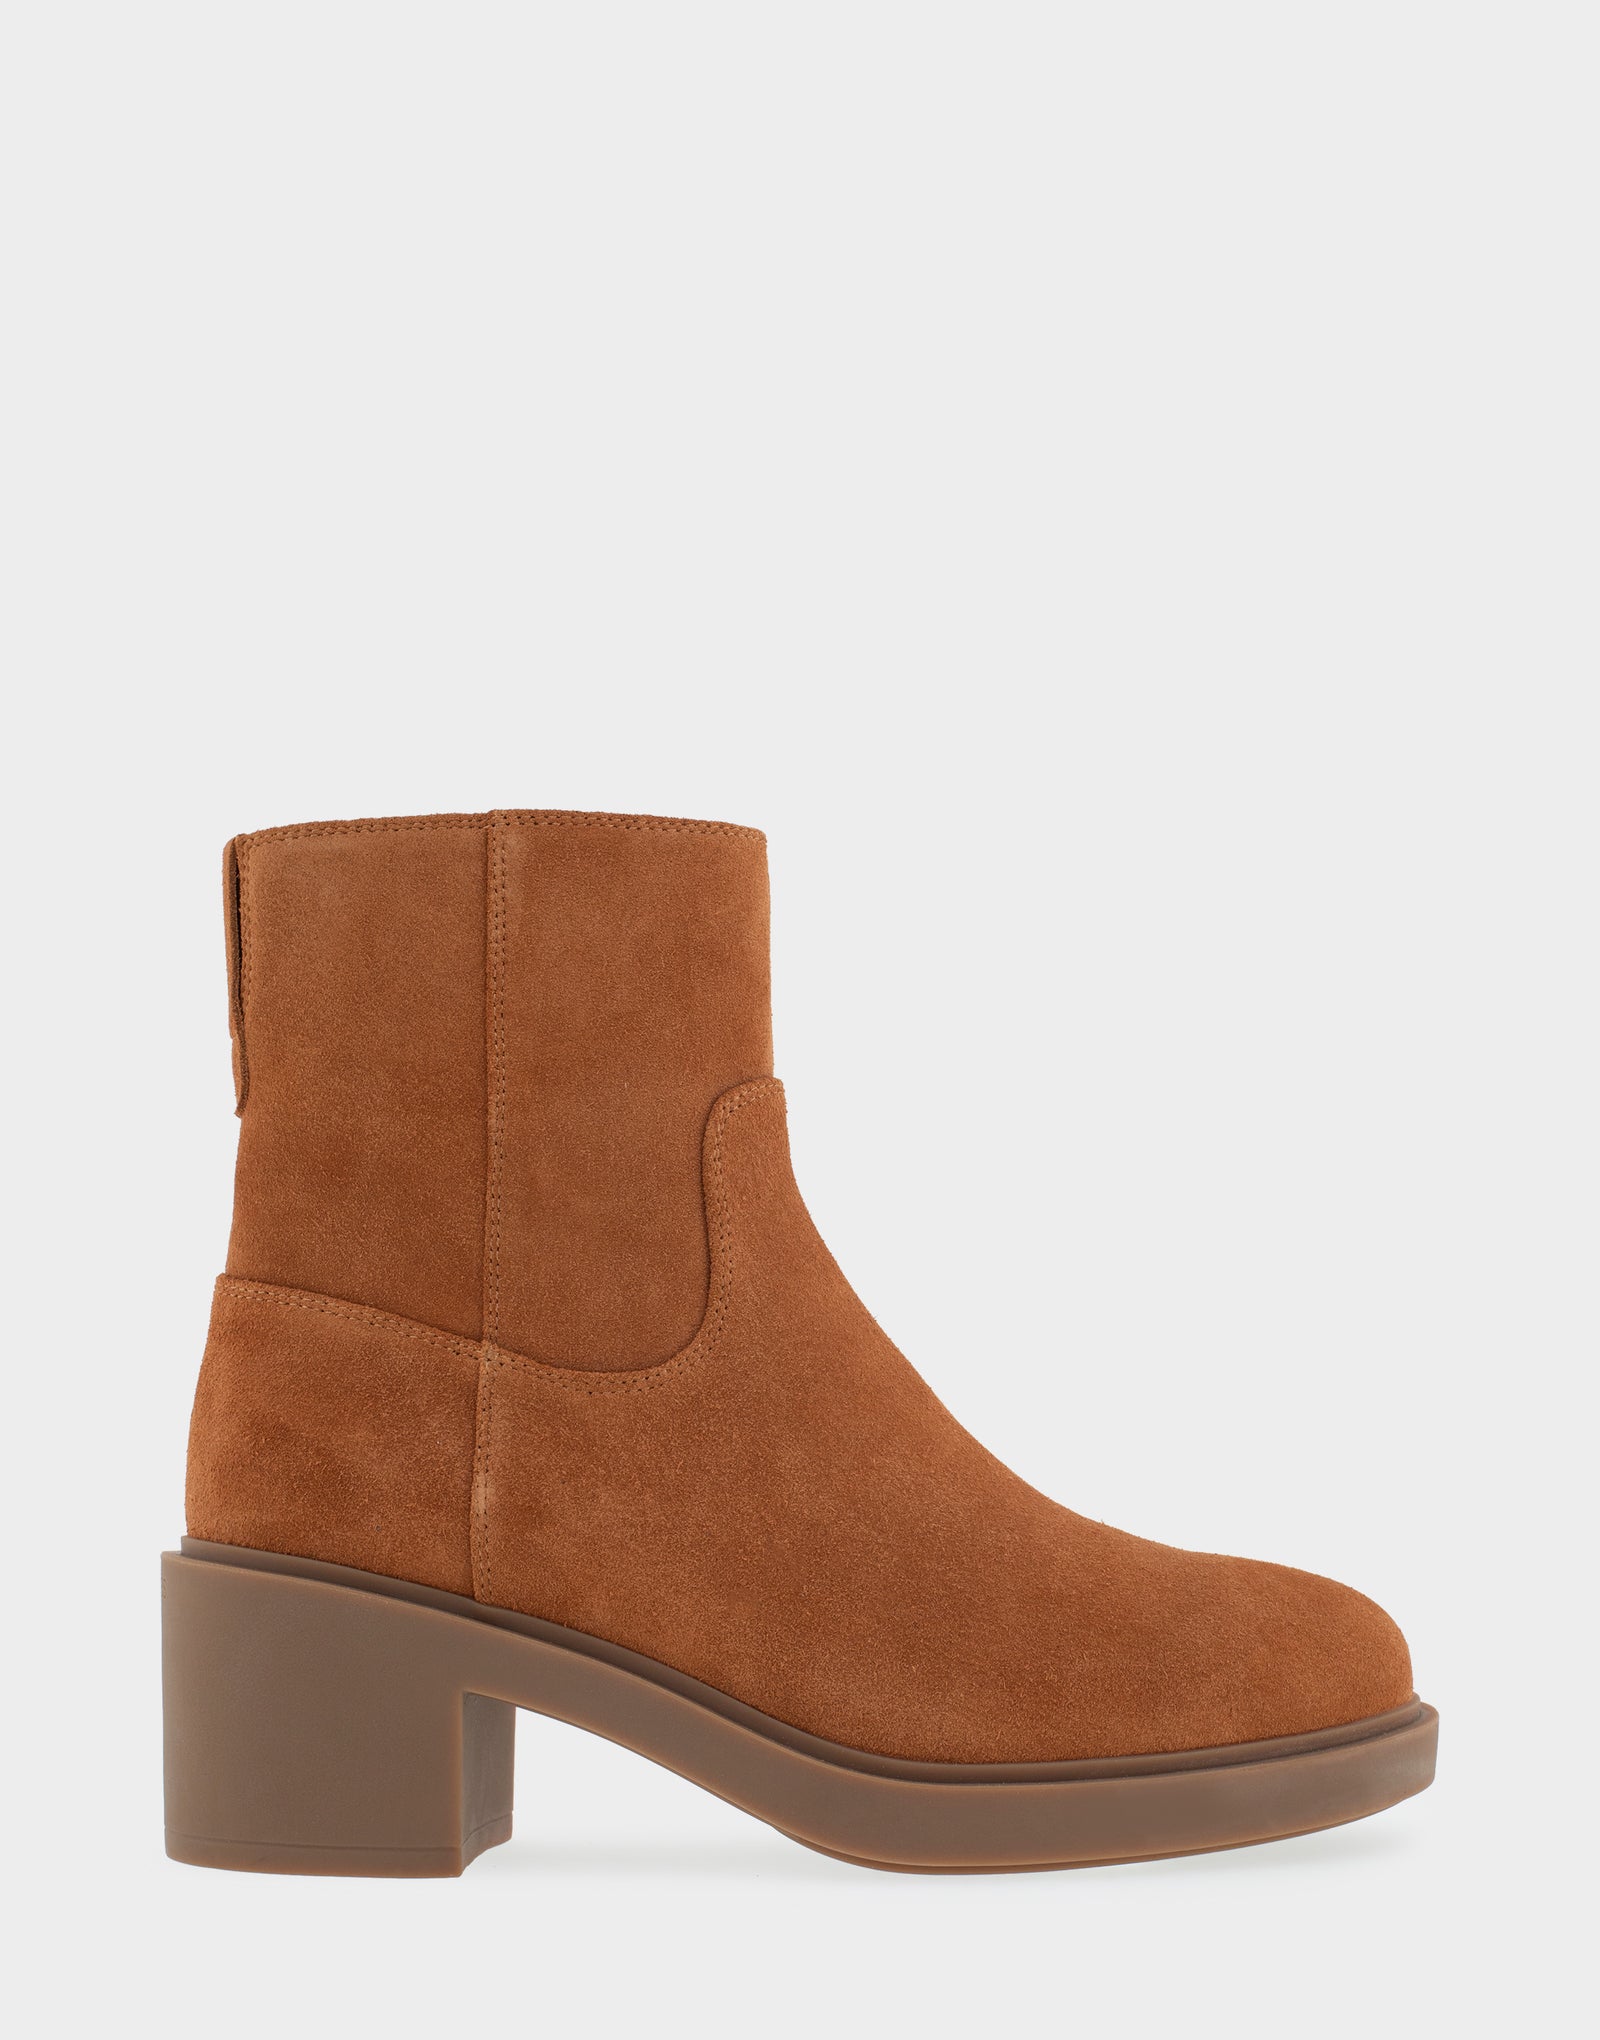 Women's Heeled Ankle Boot in Tan